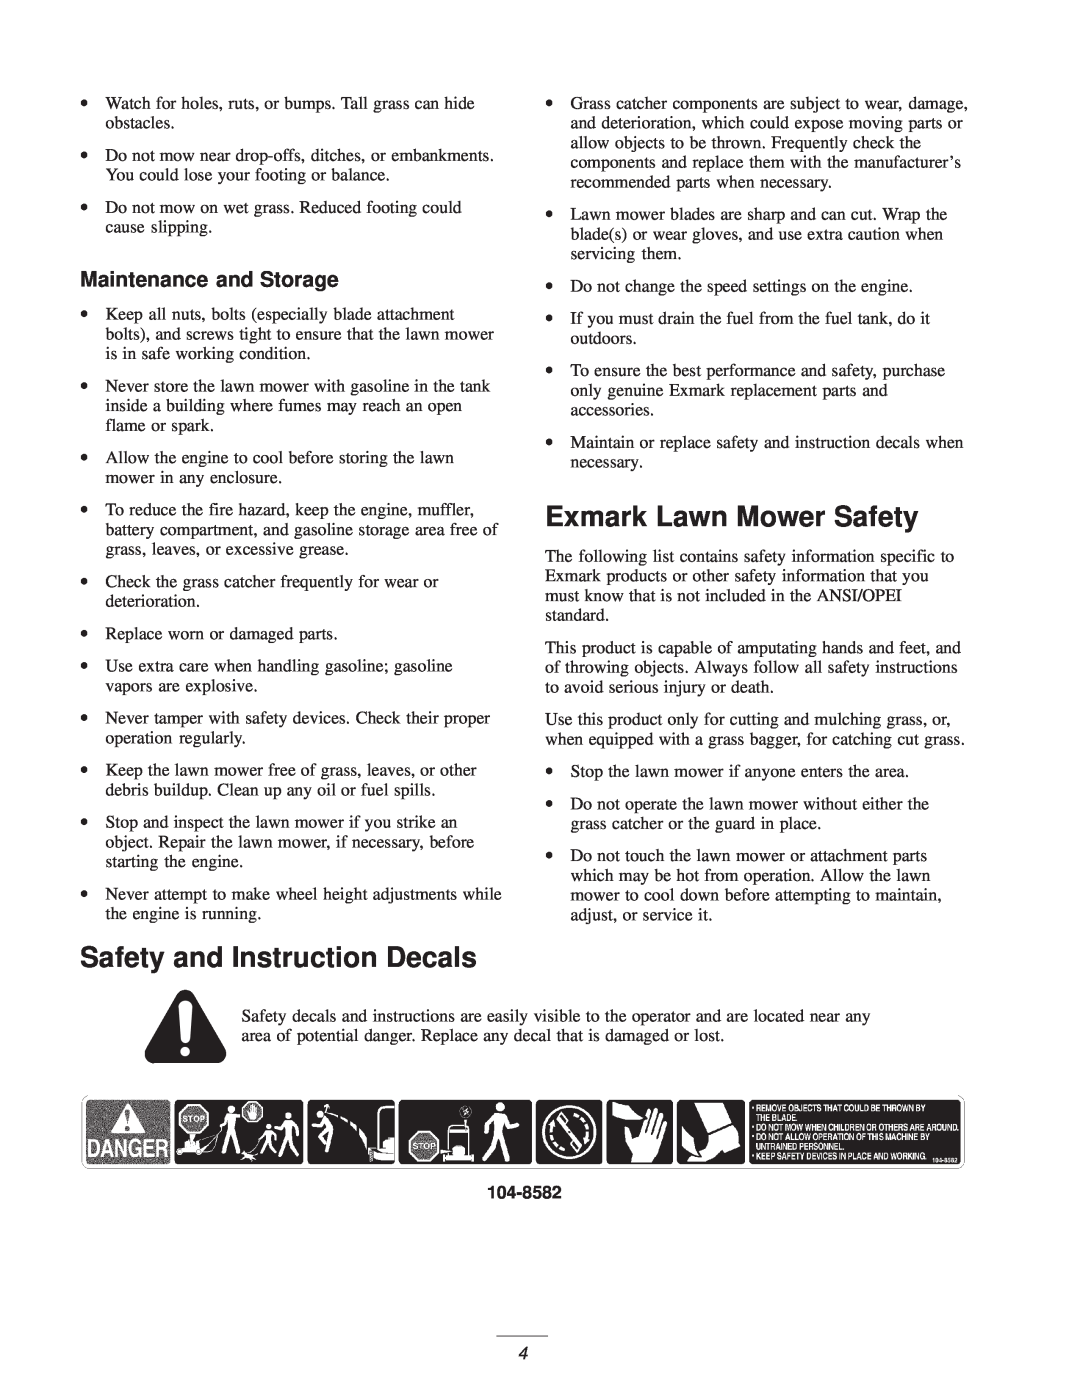 Exmark M216KASPC manual Exmark Lawn Mower Safety, Safety and Instruction Decals, Maintenance and Storage, 104-8582 